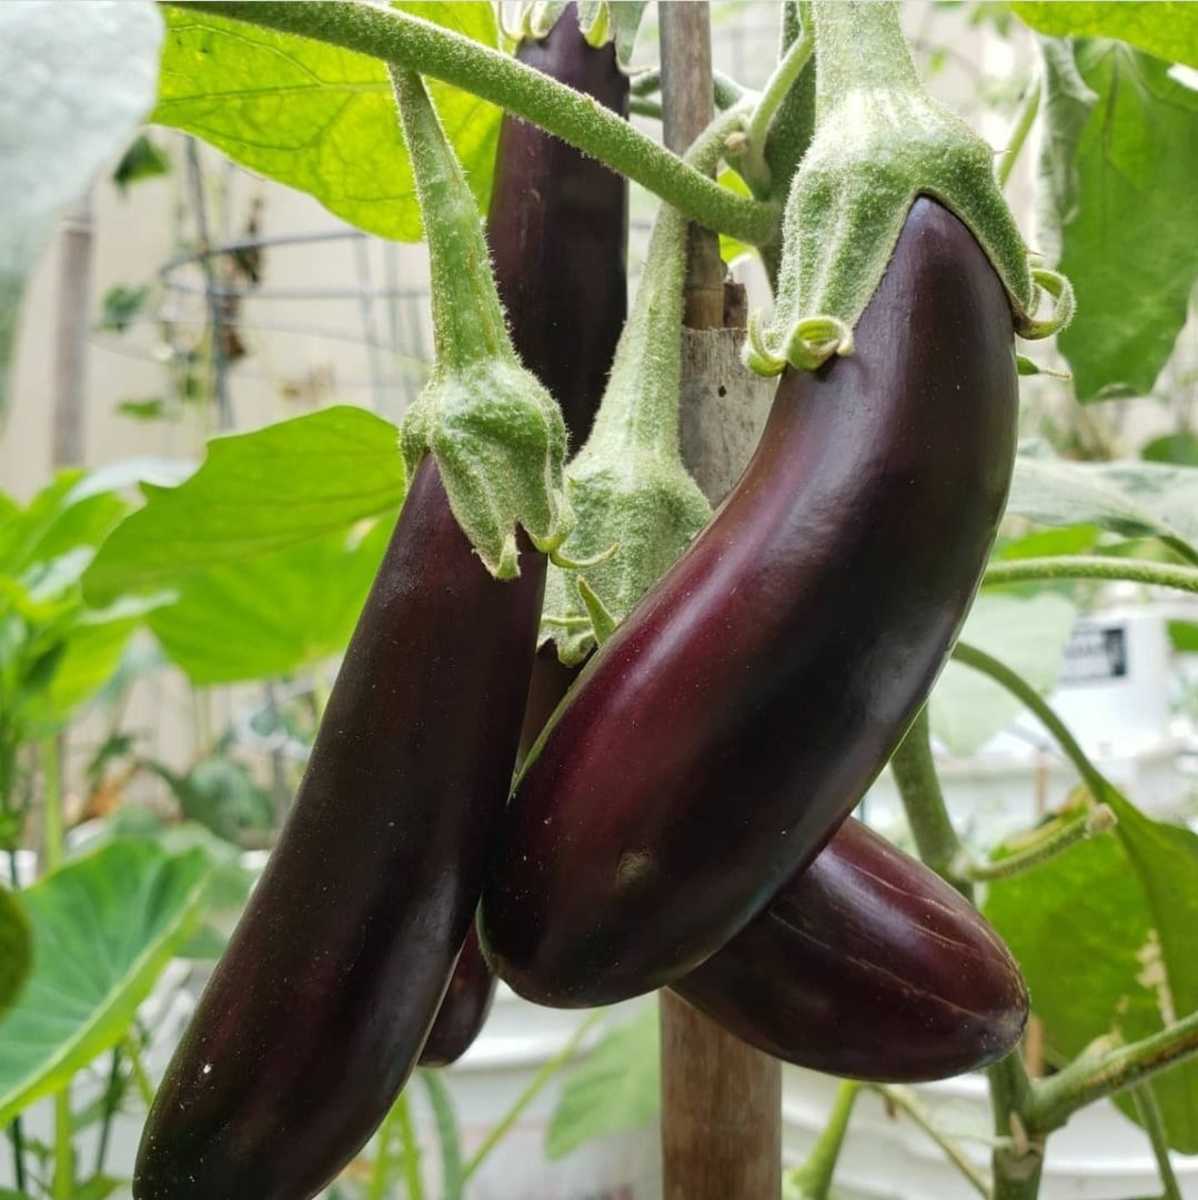 Eggplants are used in many Filipino dishes.